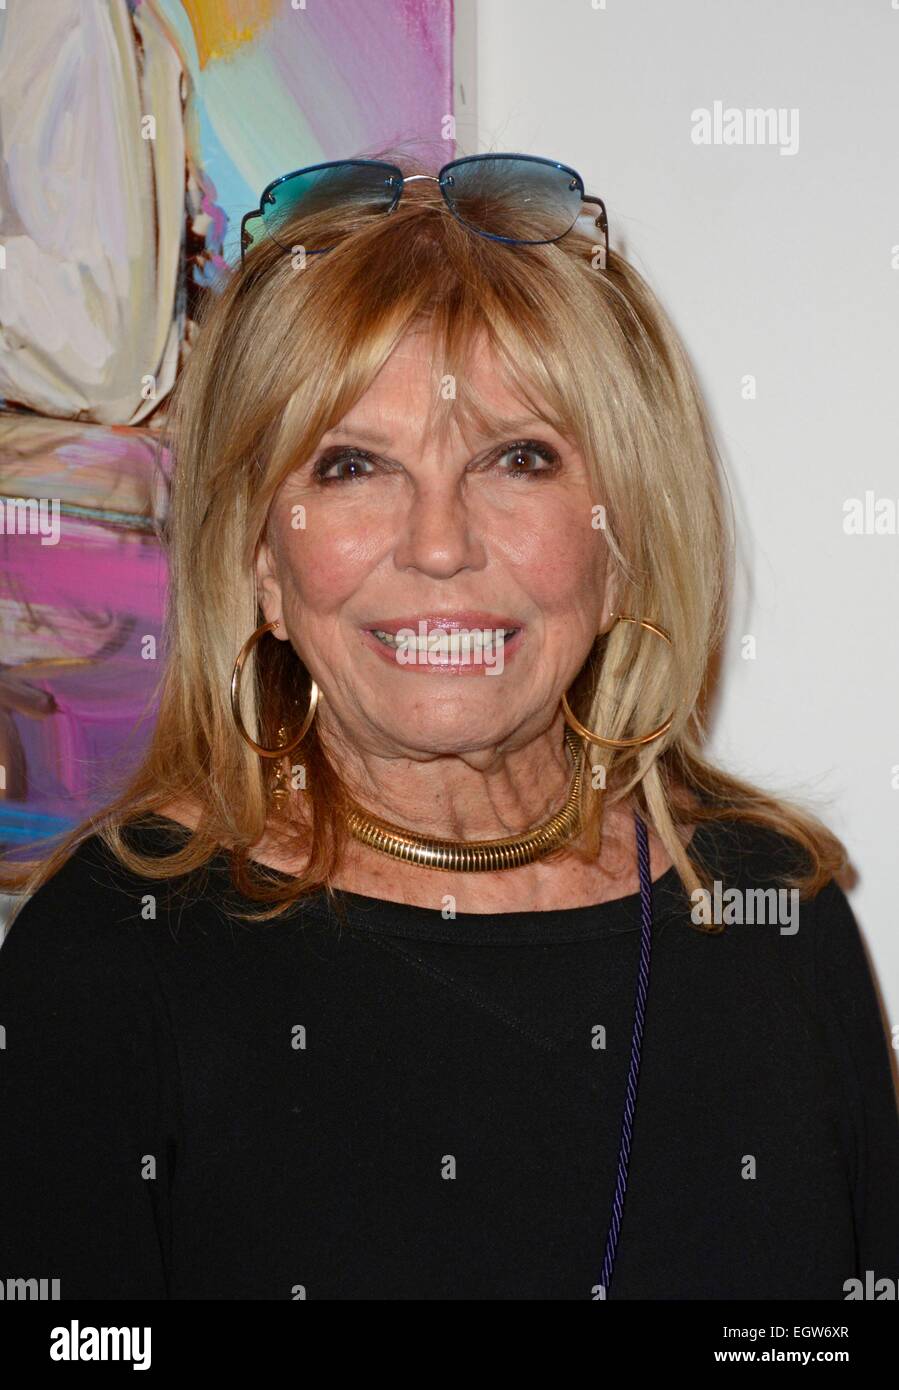 New York, NY, USA. 2nd Mar, 2015. Nancy Sinatra at arrivals for Unveiling of New Paintings by Peter Max for Centennial of Frank Sinatra's Birthday, Peter Max studio, New York, NY March 2, 2015. Credit:  Derek Storm/Everett Collection/Alamy Live News Stock Photo